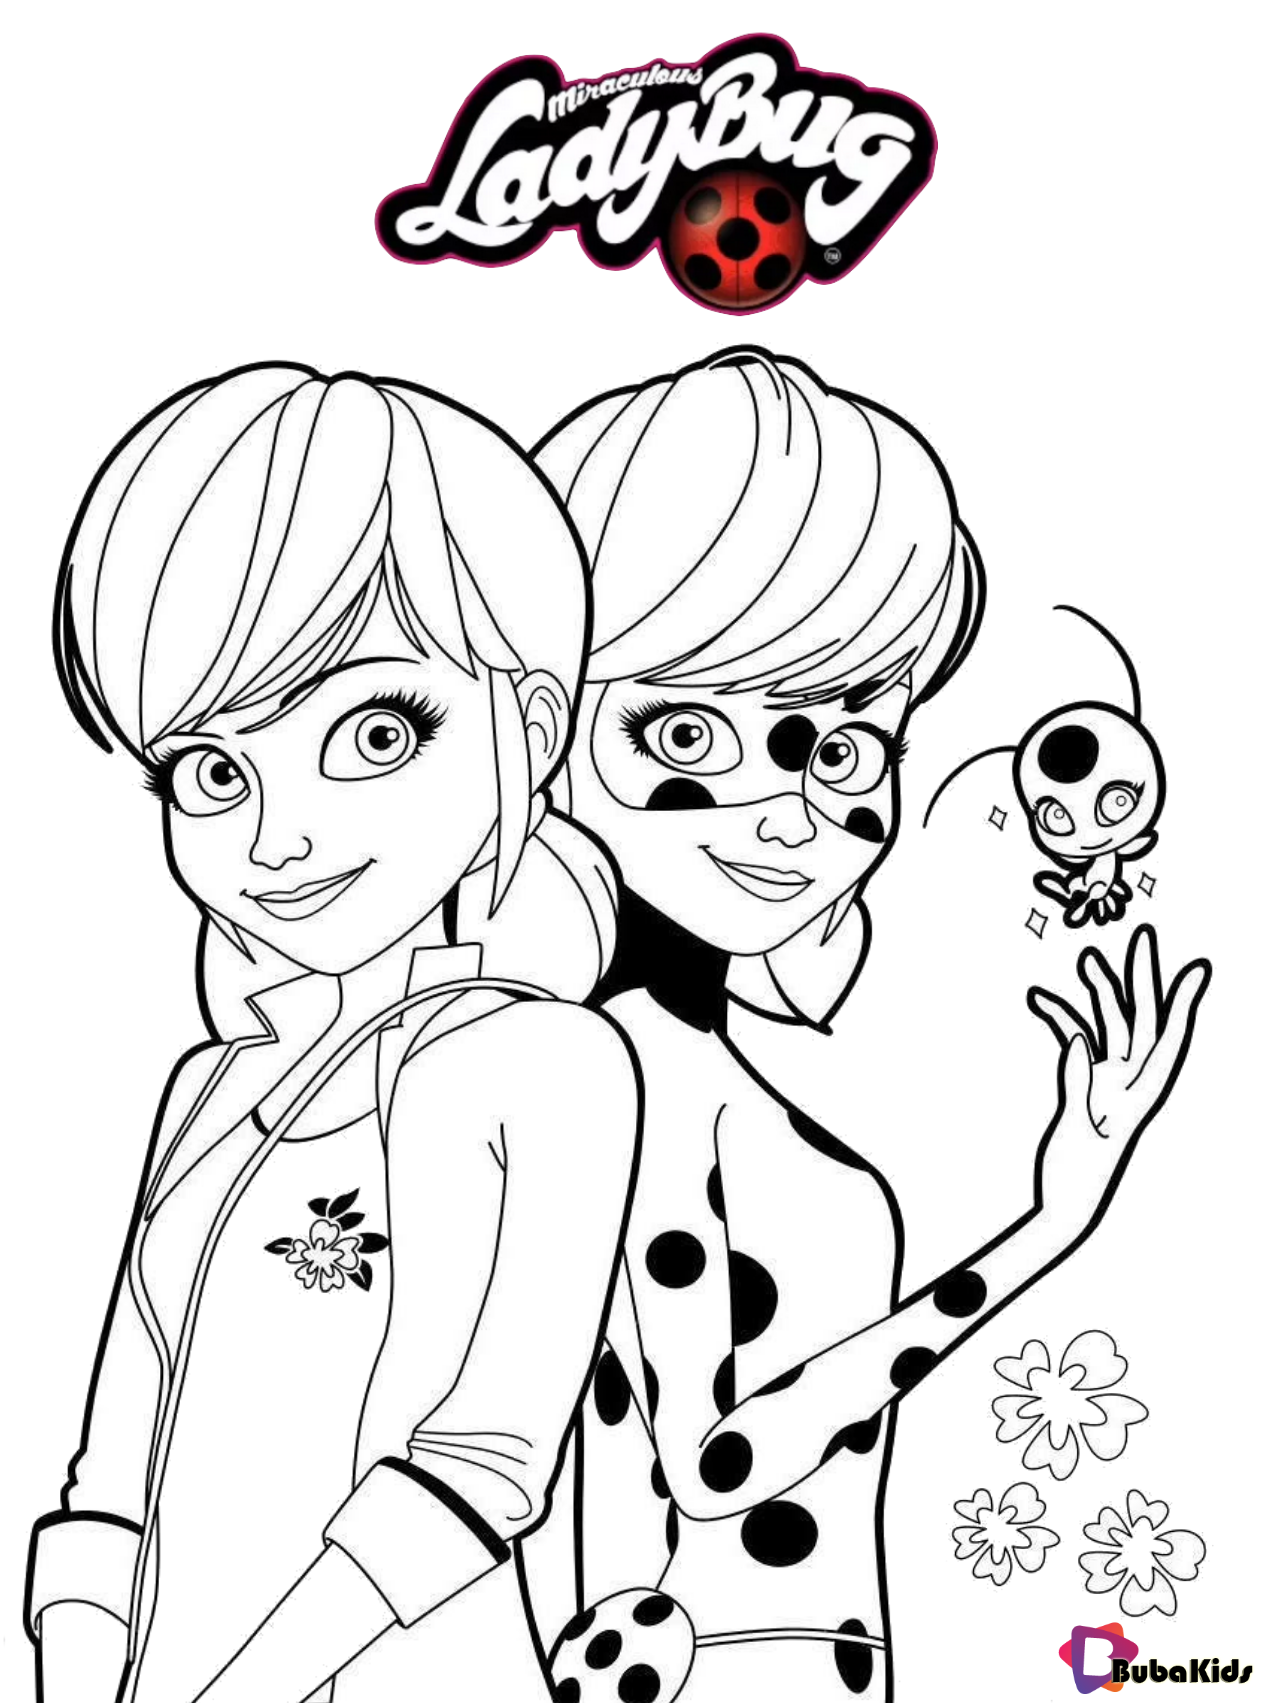 Miraculous ladybug free coloring page for kids - BubaKids.com